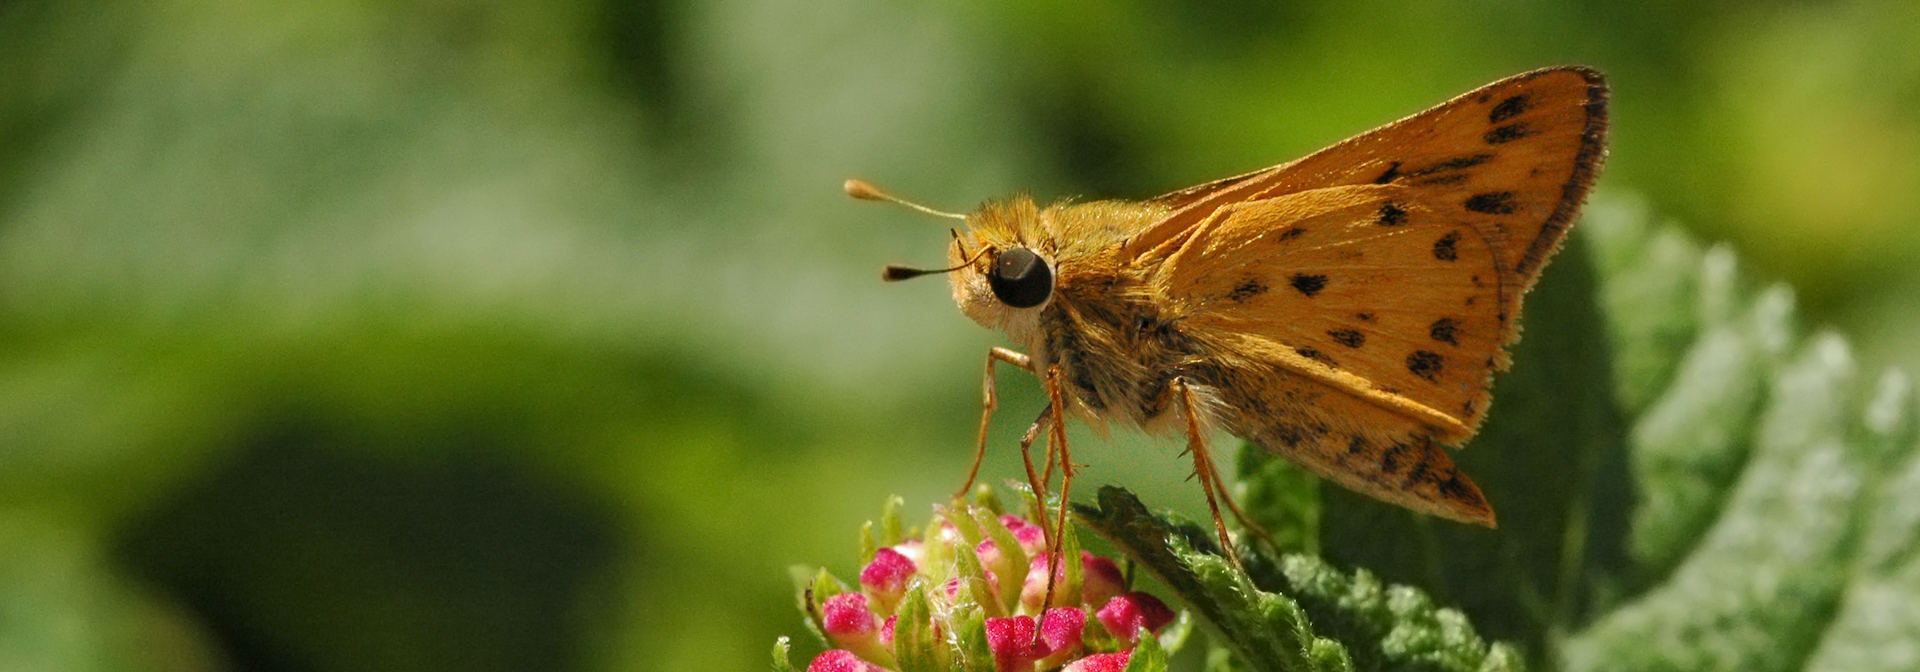 Georgeous photograph of an orange skipper butterfly on a leaf.